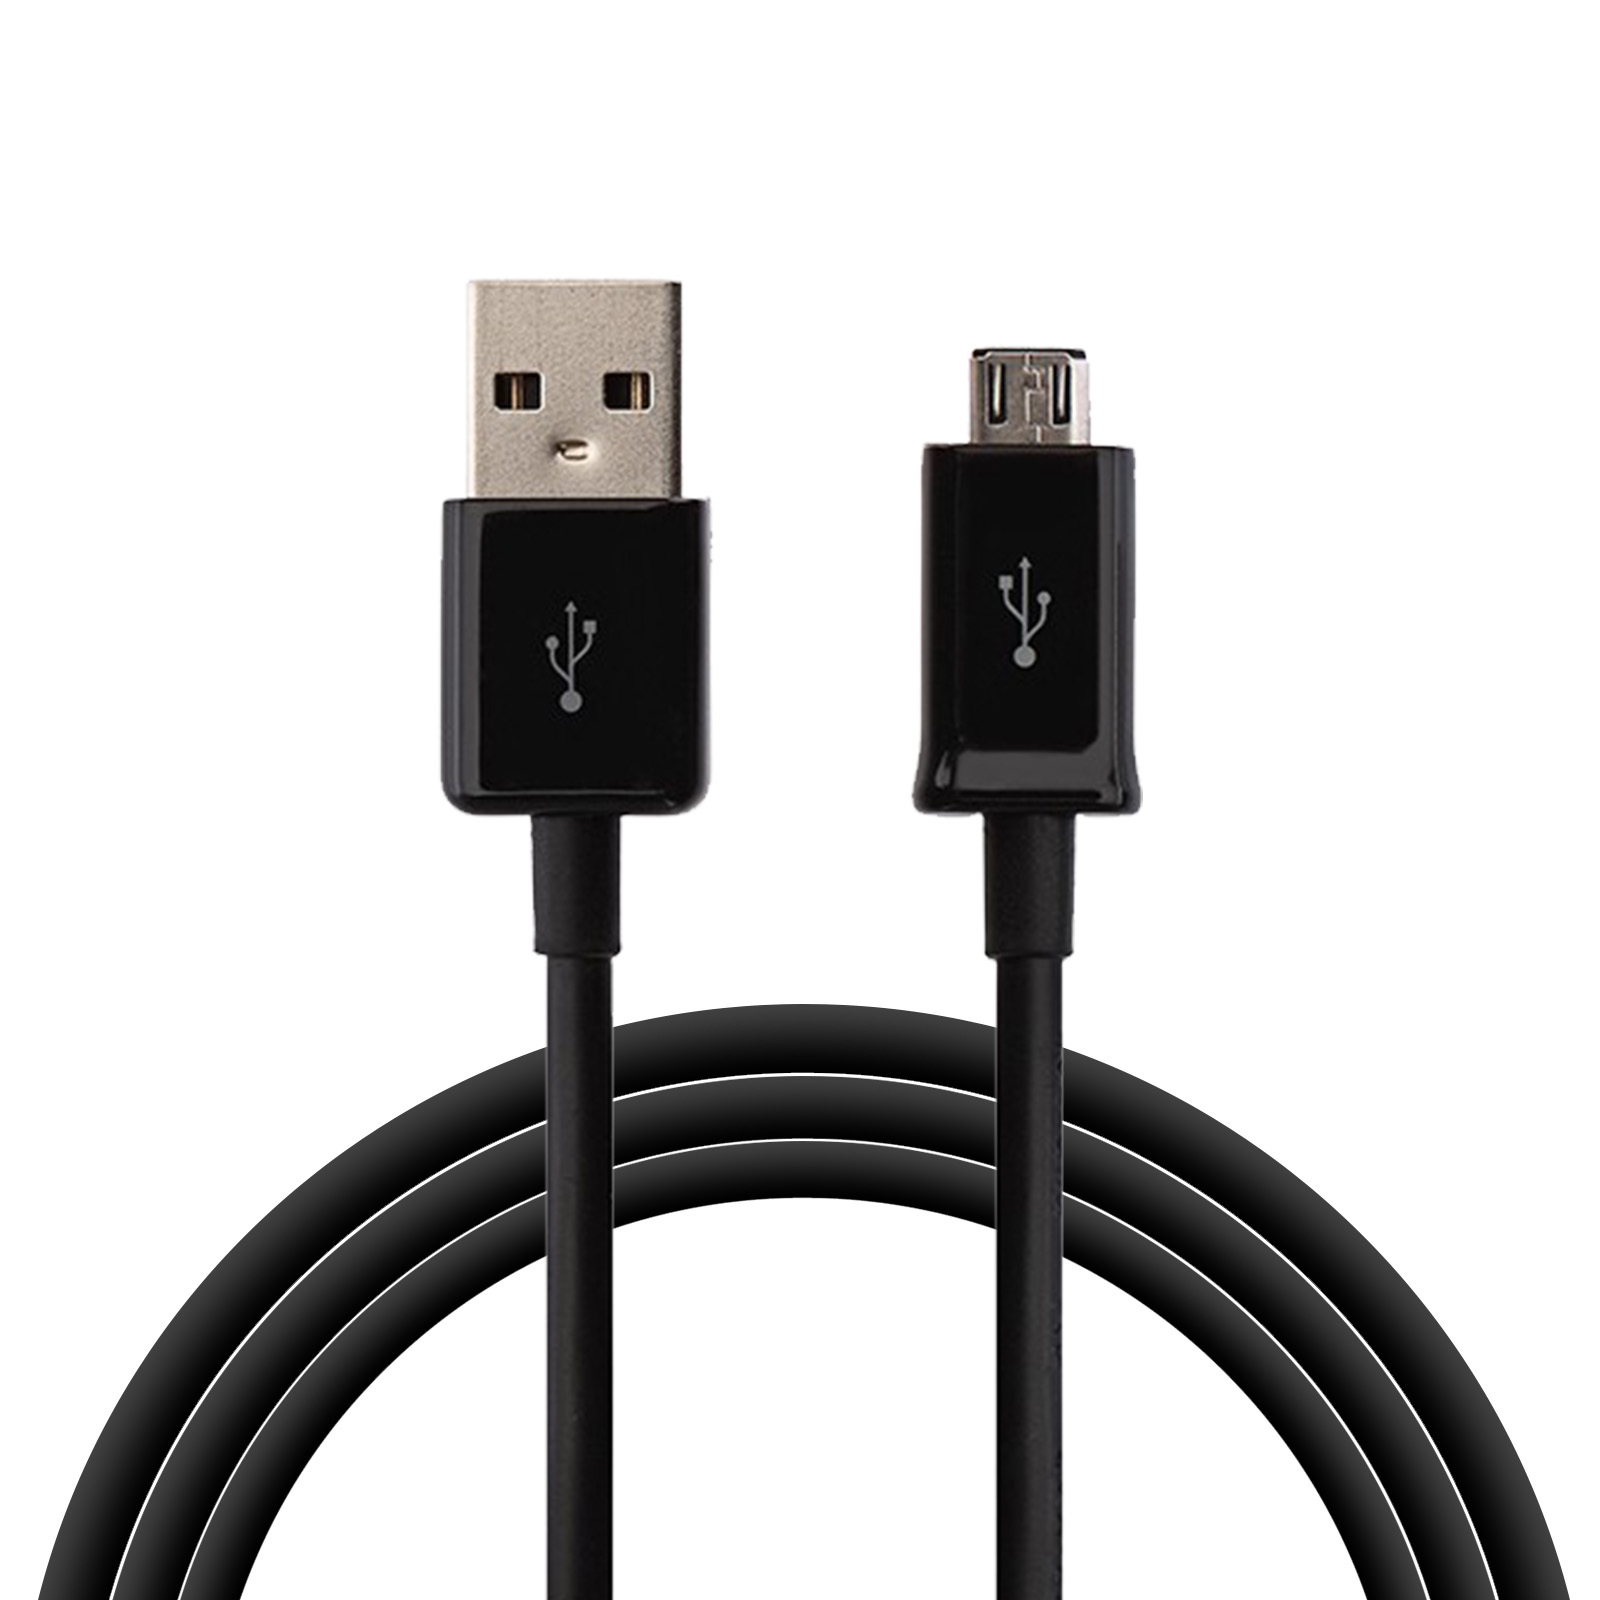 New Samsung Galaxy NOTE 5 S4 S6 EDGE GH39-01578B Micro USB Cable